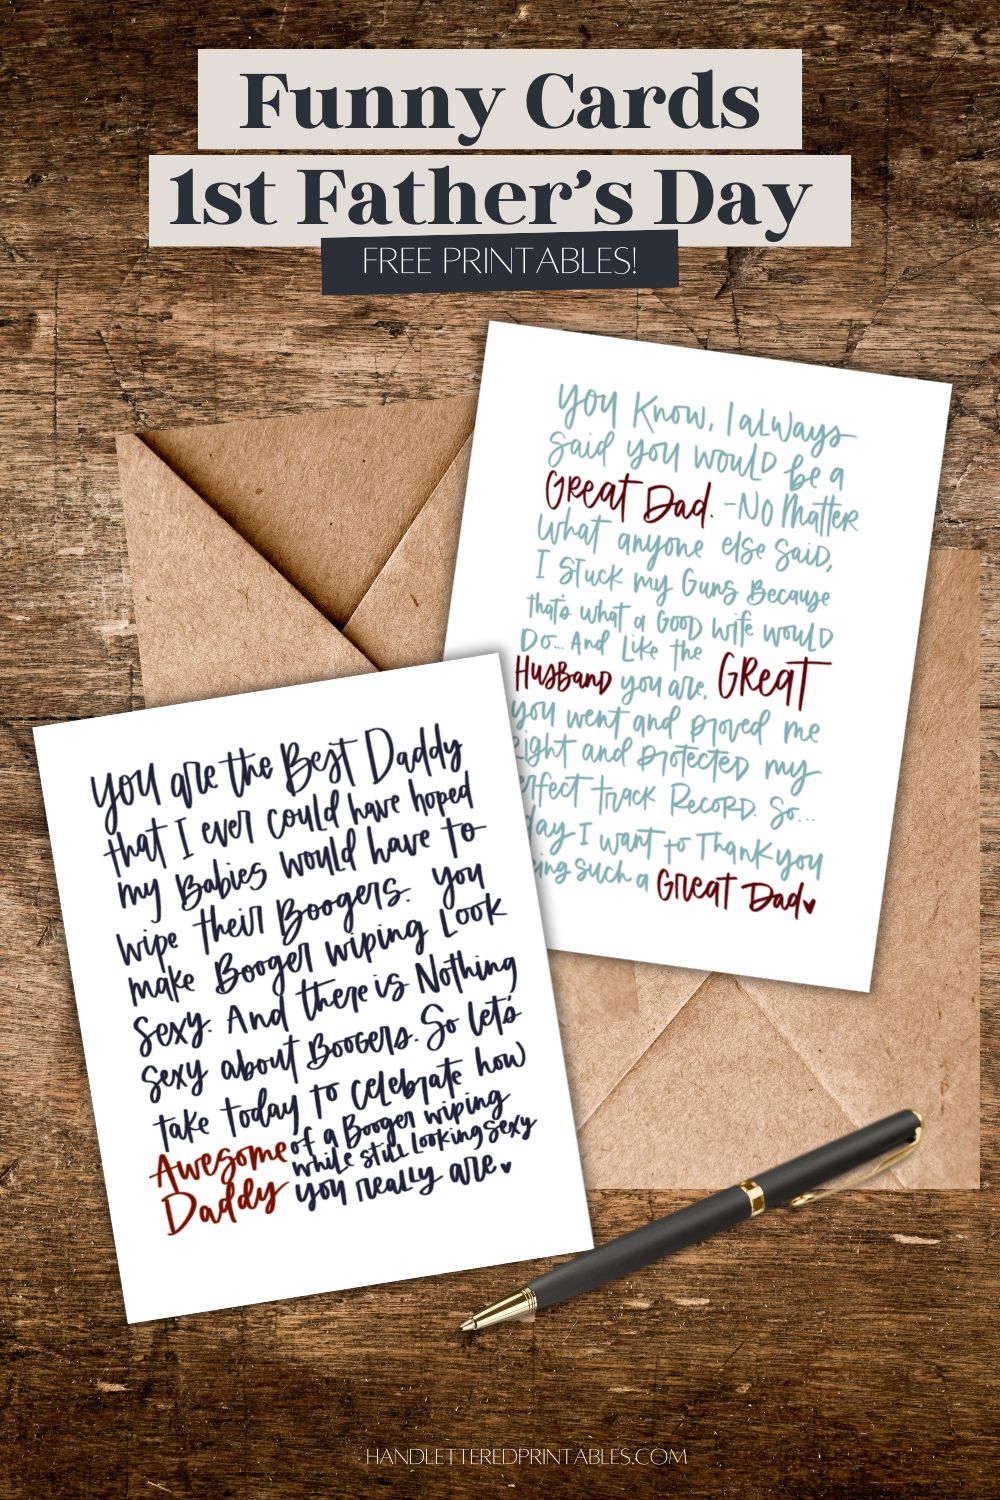 2 free printable father's day cards on wooden table with kraft envelopes and a pen. First card reads: you are the best daddy that I could ever have hoped my babies would have to wipe their boogers. You make booger wiping look sexy. And there is nothing sexy about boogers. So let's take today to celebrate how awesome of a booger wiping while still looking sexy you really are. Second card reads: you know, I always said you would be a great dad. no matter what anyone else said, I stuck to my guns because that's what a good wife would do. And like the Great husband that you are, you went and proved me right and protected my perfect track record. So today I want to thank you for being such a great dad. Text over reads: funny cards 1st father's day free printables